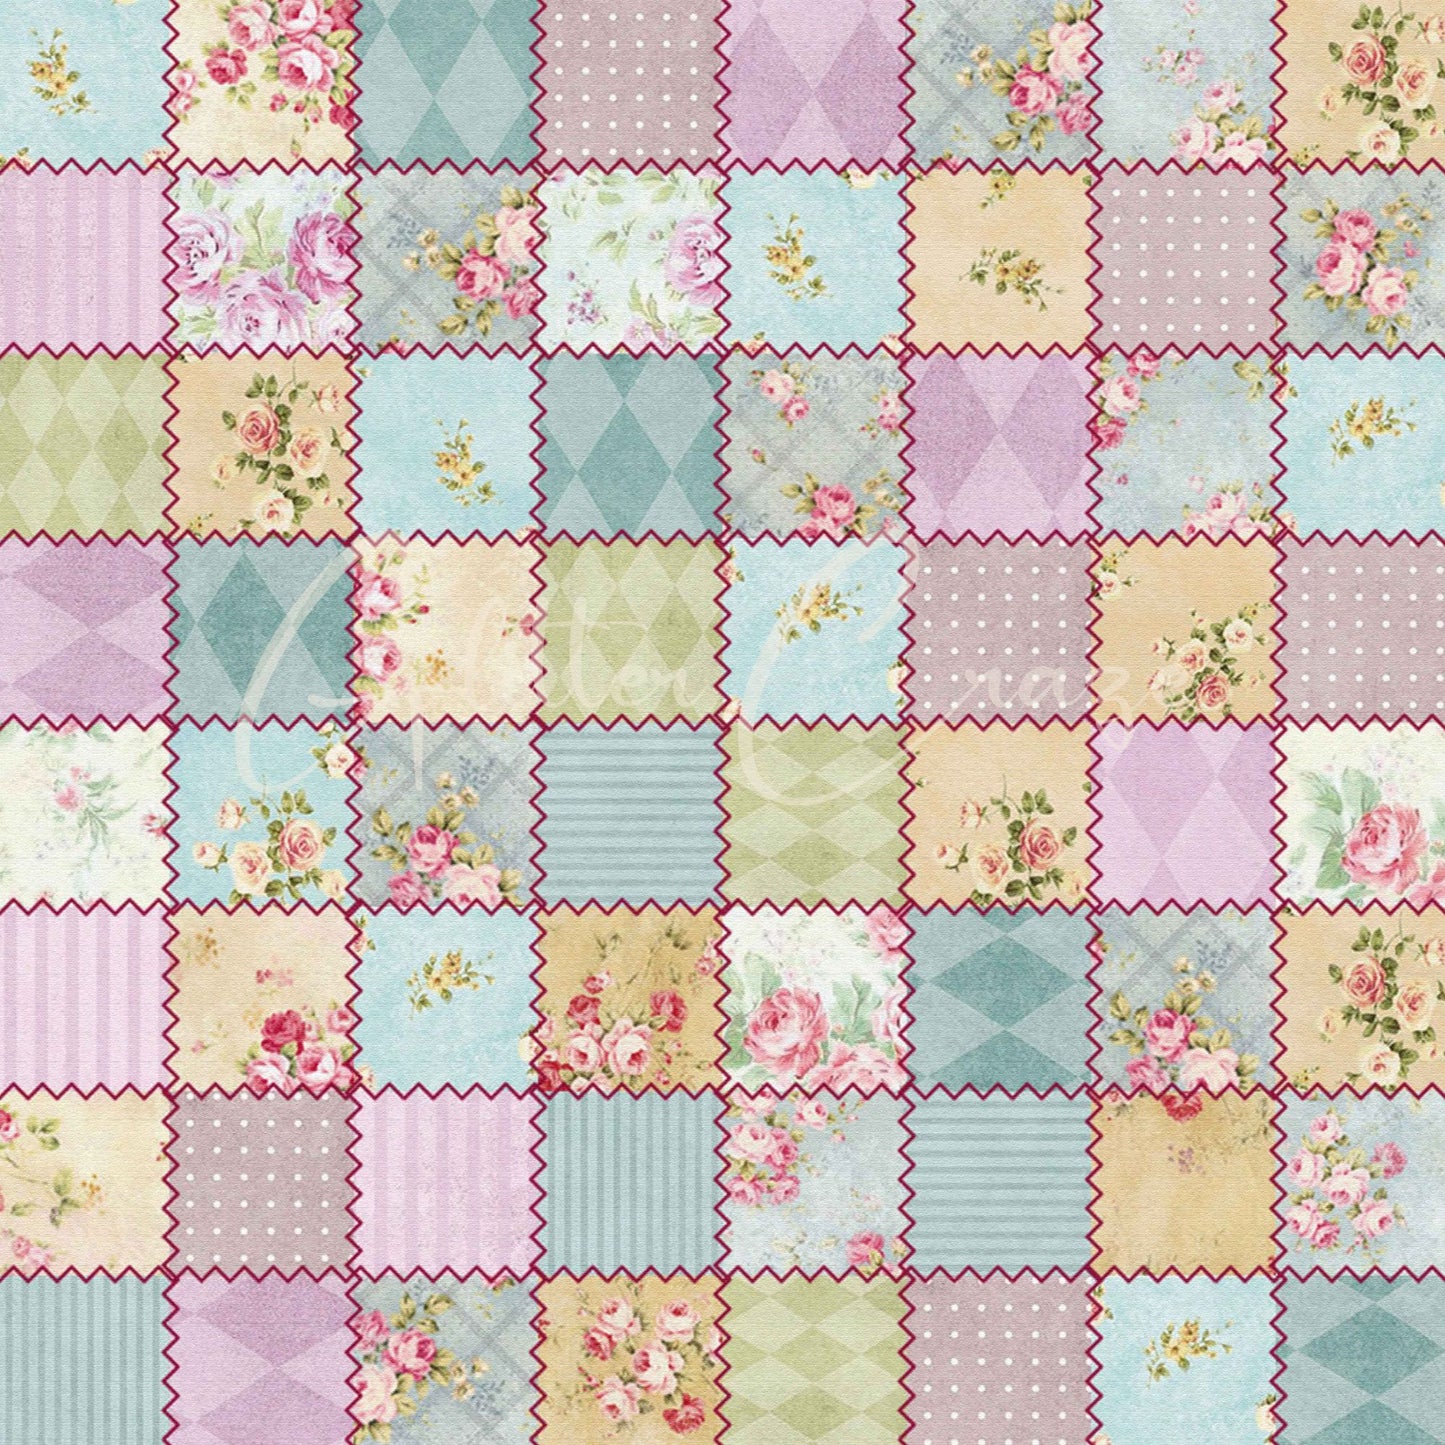 Patchwork Collection 12x12 Vinyl Sheets- 12 Patterns Available